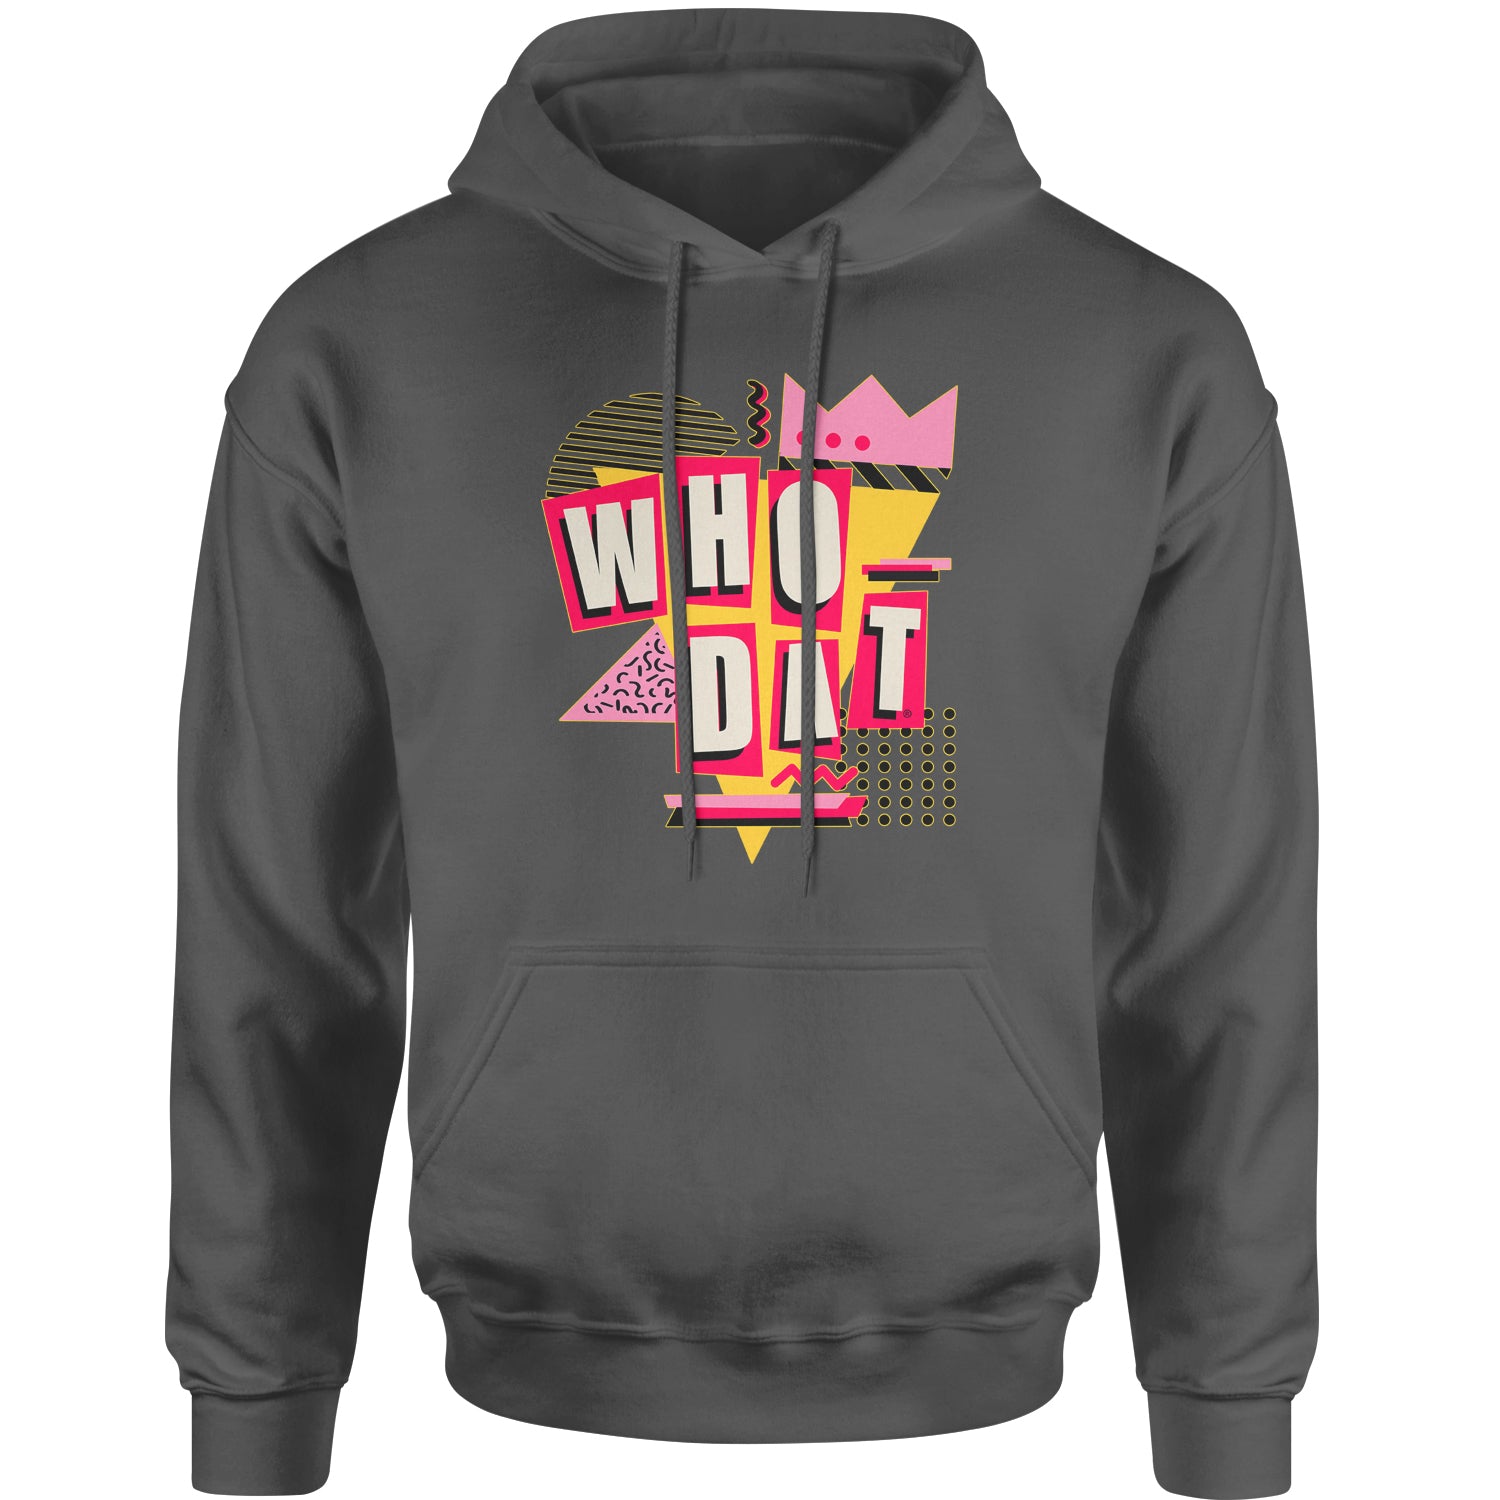 Who Dat New Orleans Adult Hoodie Sweatshirt brees, colston, drew, louisiana, marques, payton, sean by Expression Tees